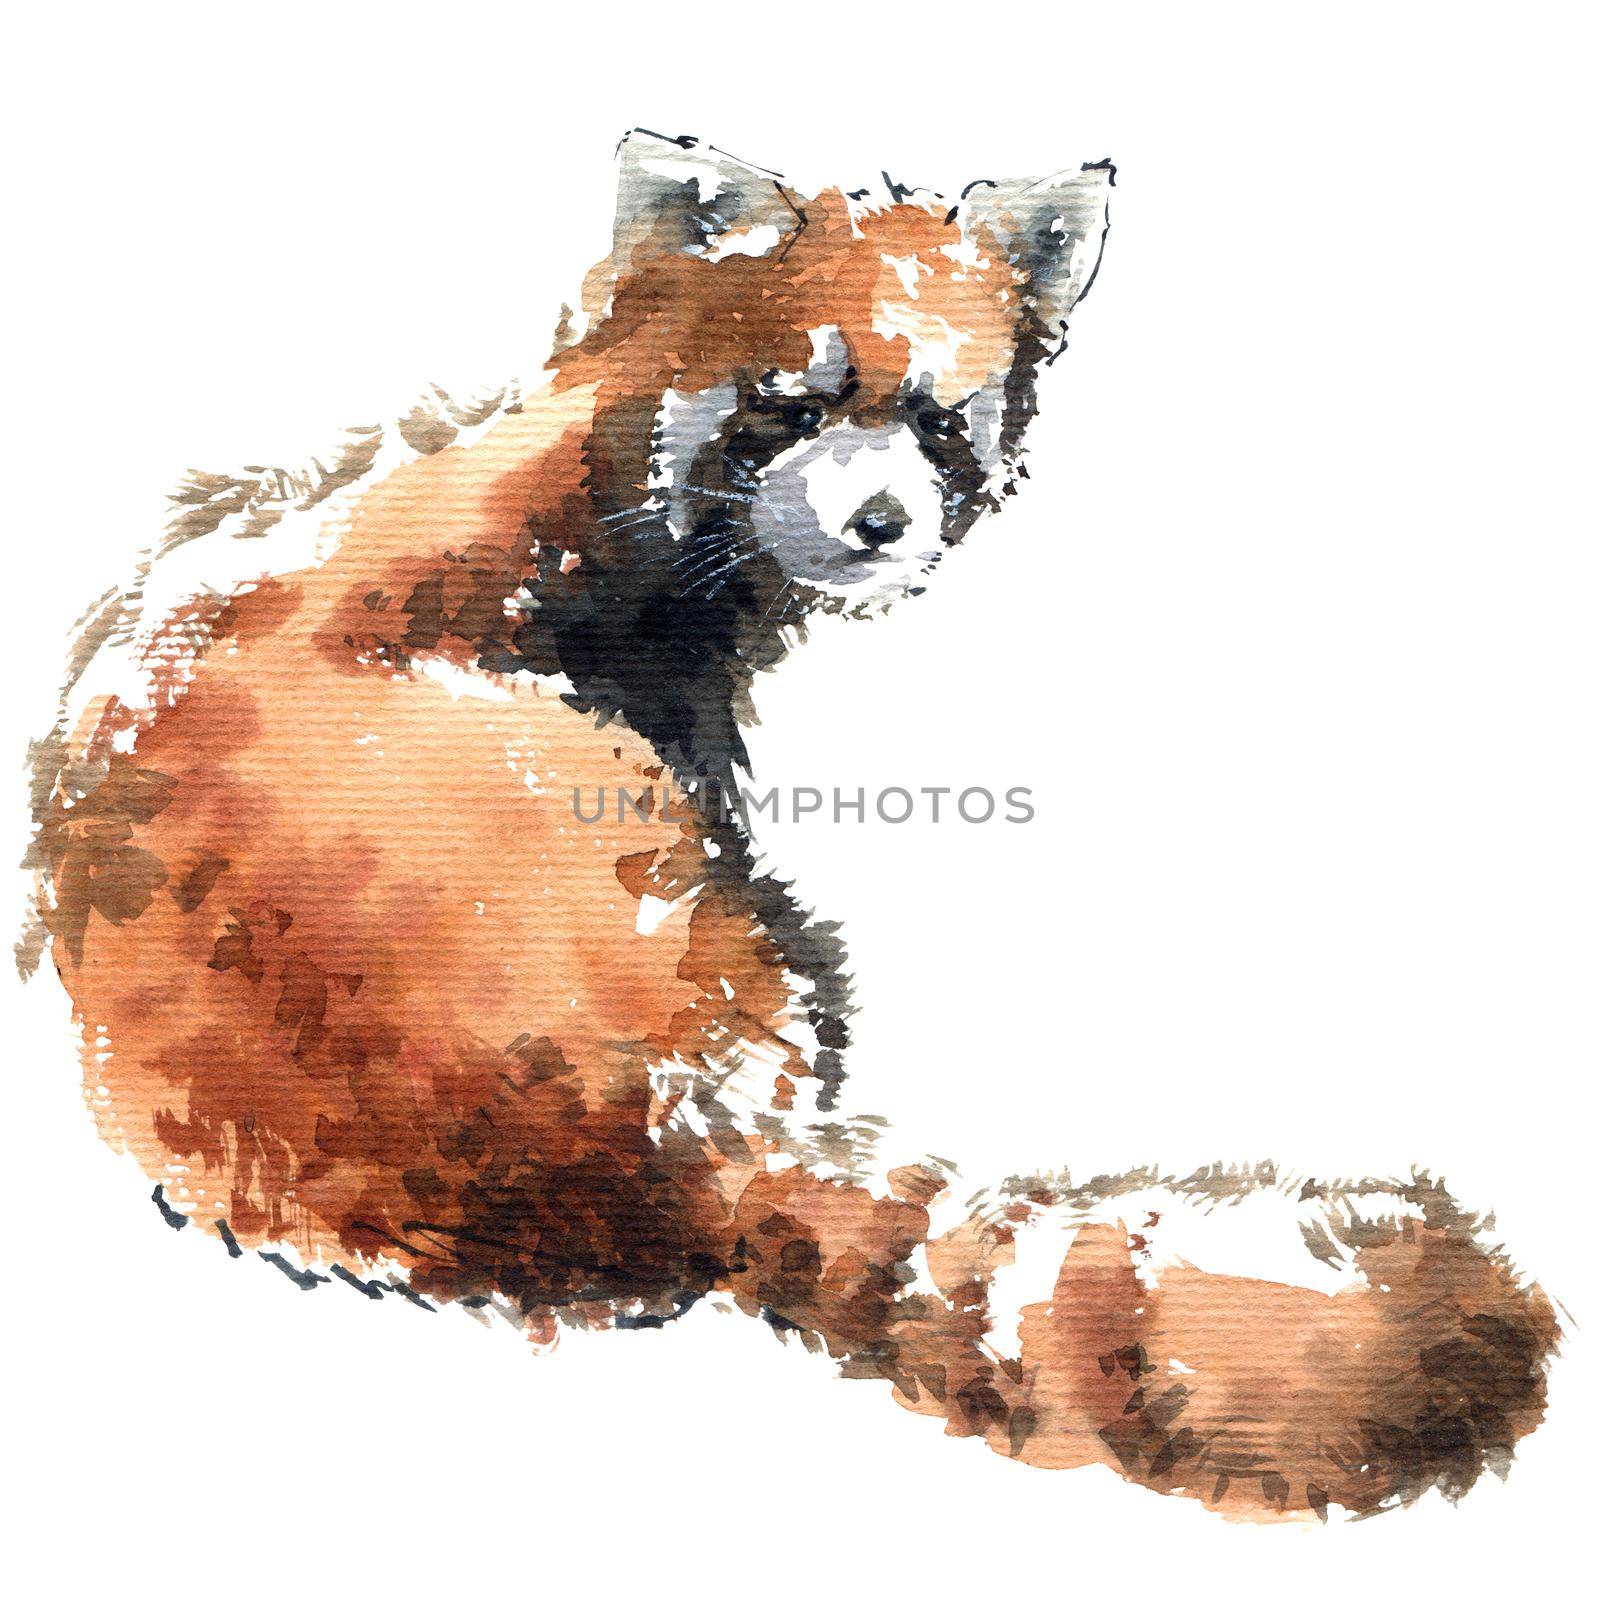 Watercolor illustration of little panda. Isolated sketch of animal on white background.